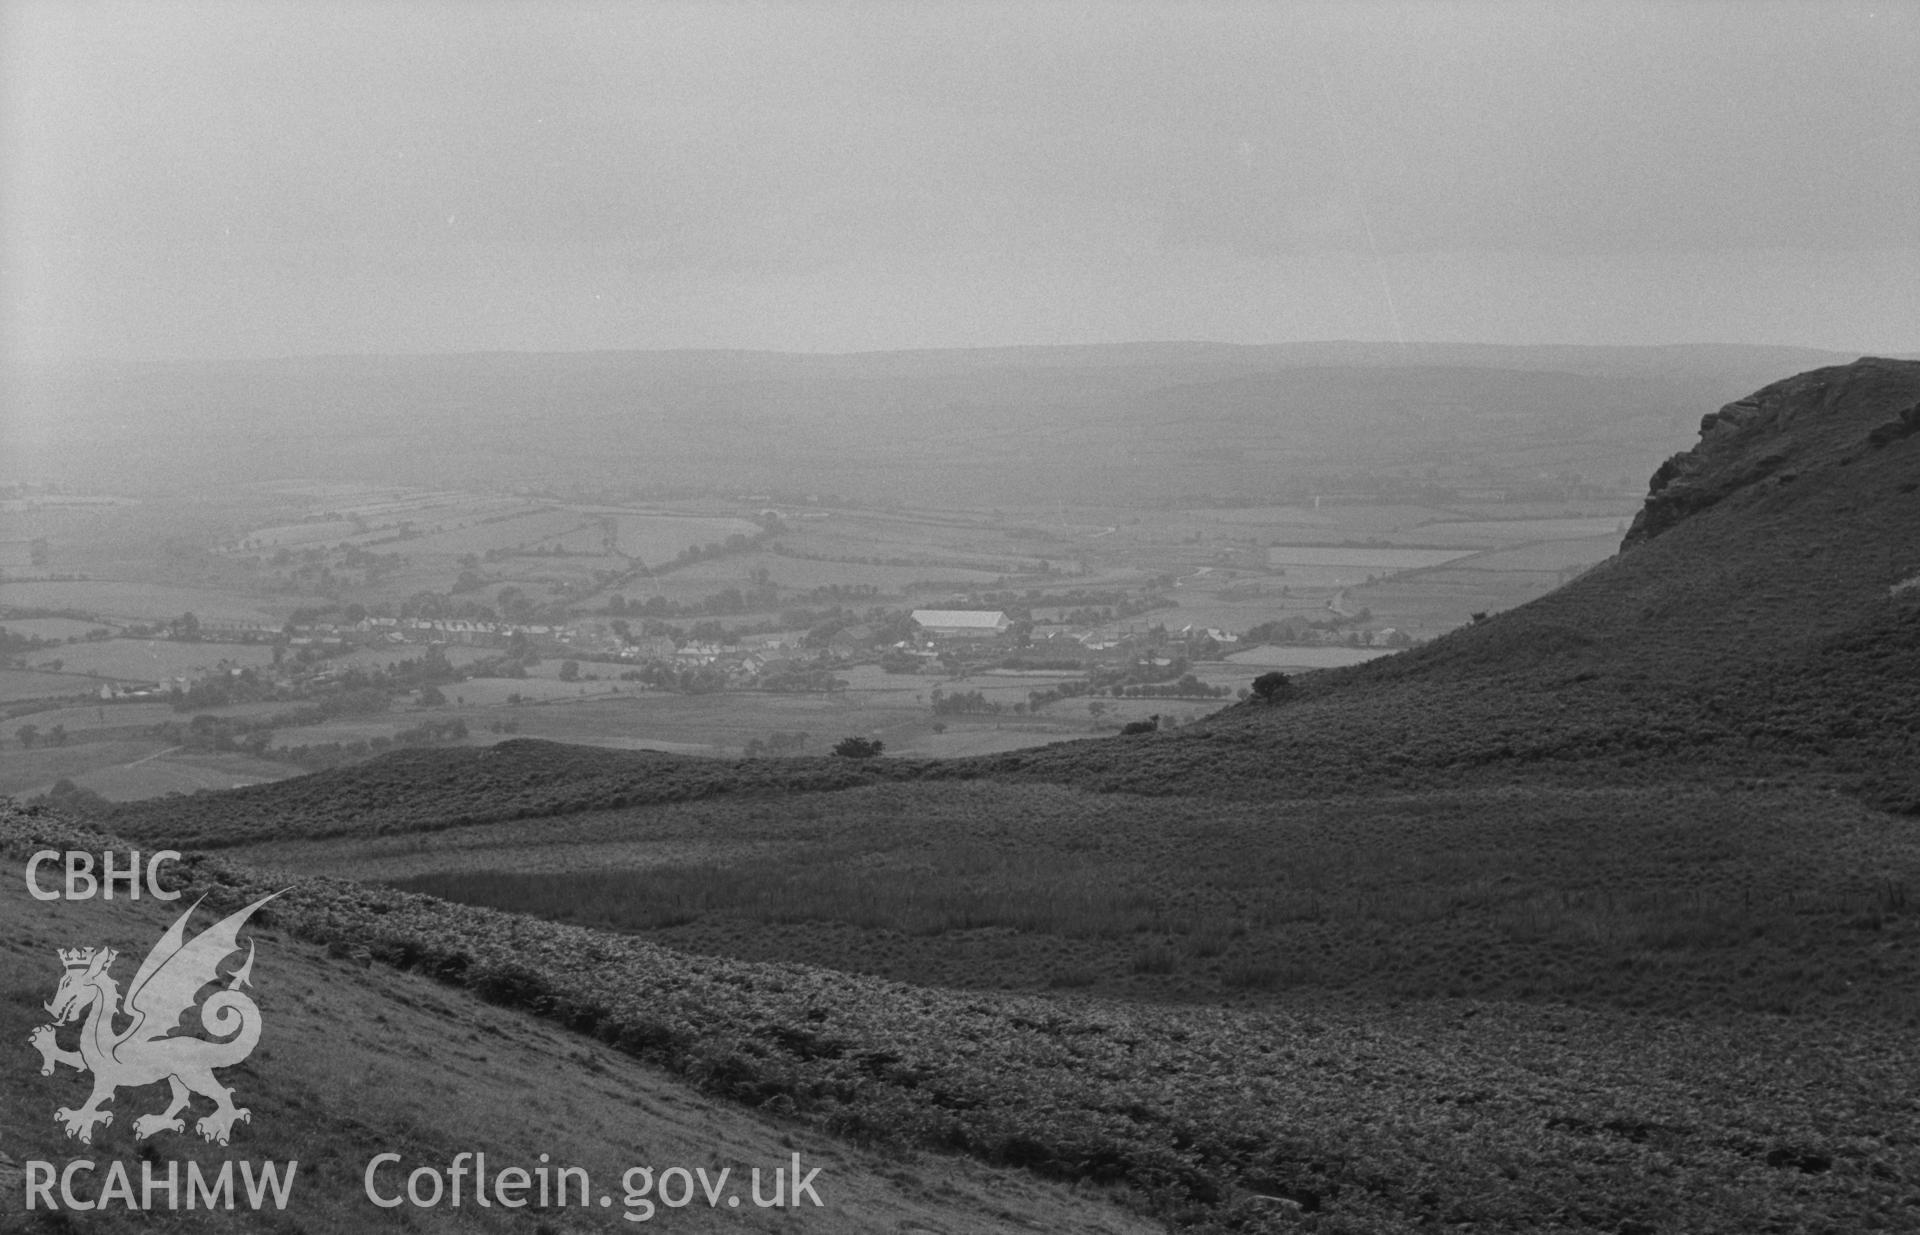 Digital copy of a black and white negative showing the village of Pontrhydfendigaid. Photographed by Arthur O. Chater on 25th August 1967 looking west from Banc Gwyn, south east of Pen y Bannau, at Grid Reference SN 743 667.